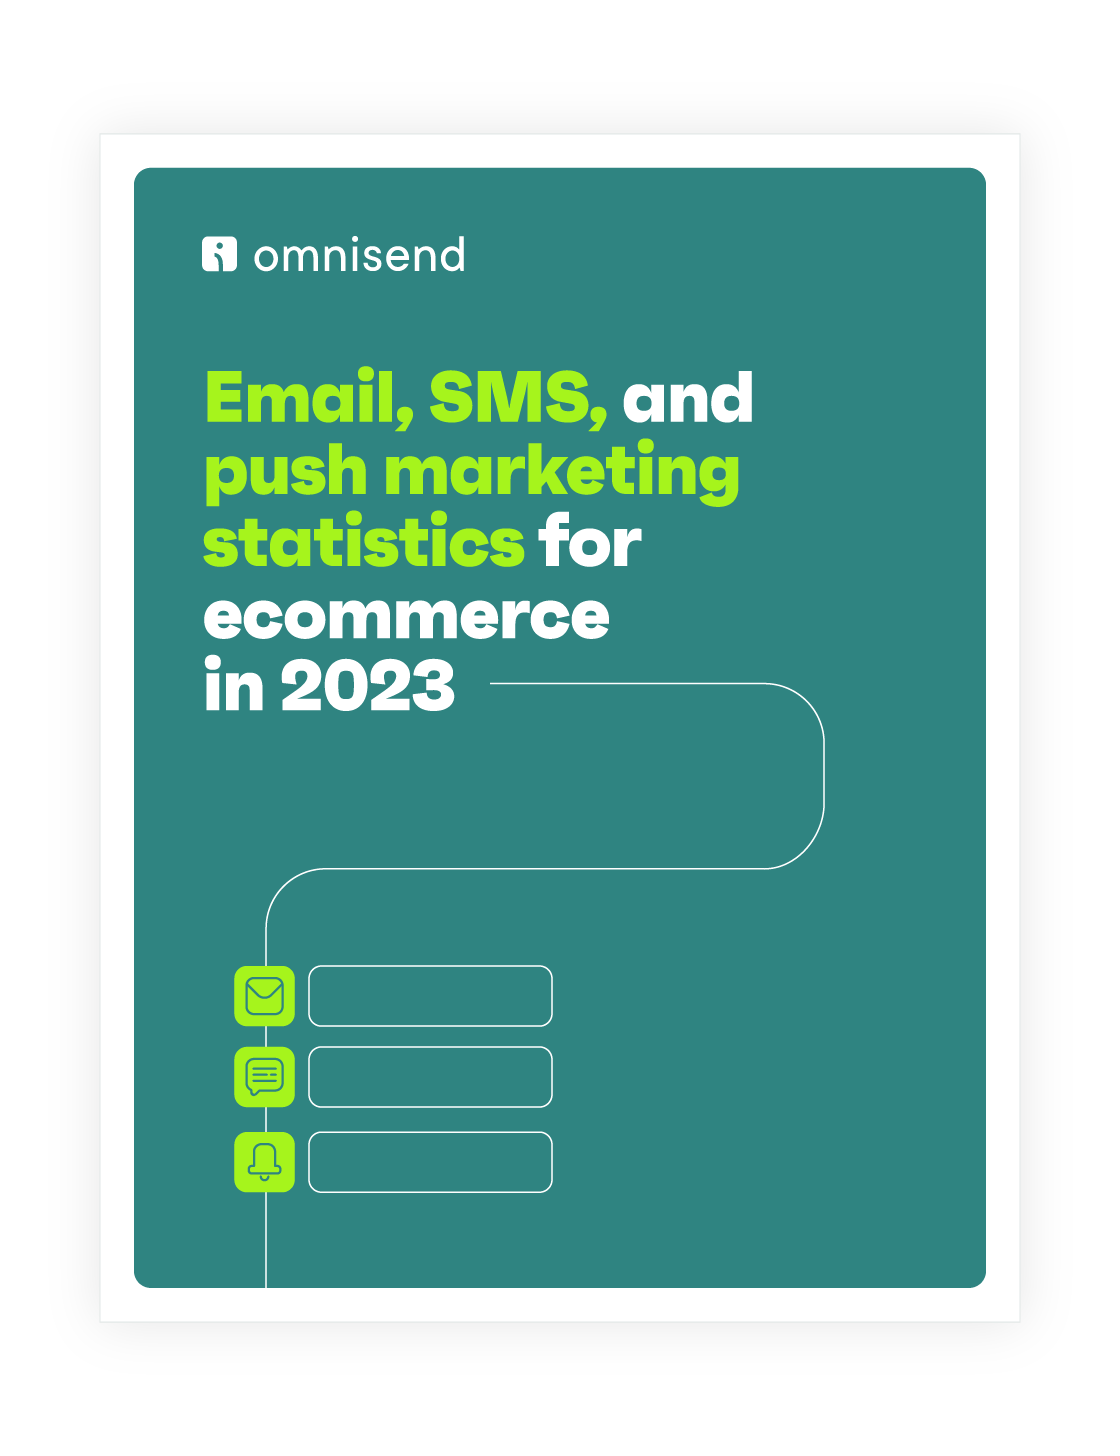 Email, SMS, and push marketing statistics for ecommerce in 2023